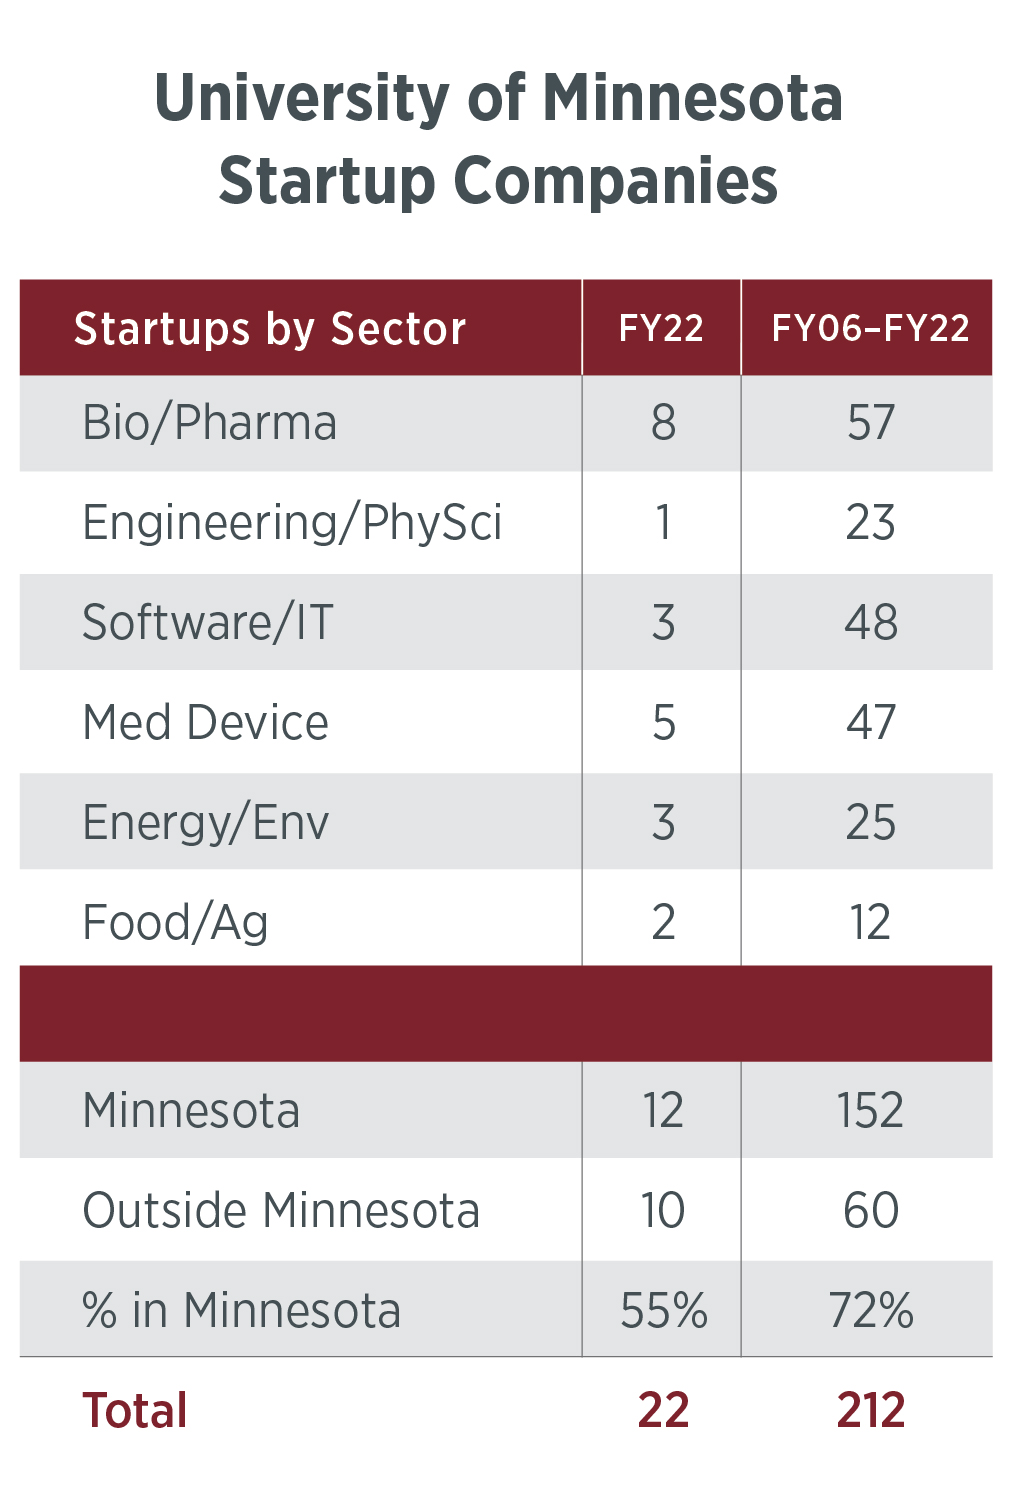 Breakdown of startups by sector and region. Startups launched 22YTD: 212. For an alternative format with the breakdowns, email ovprcomm@umn.edu.